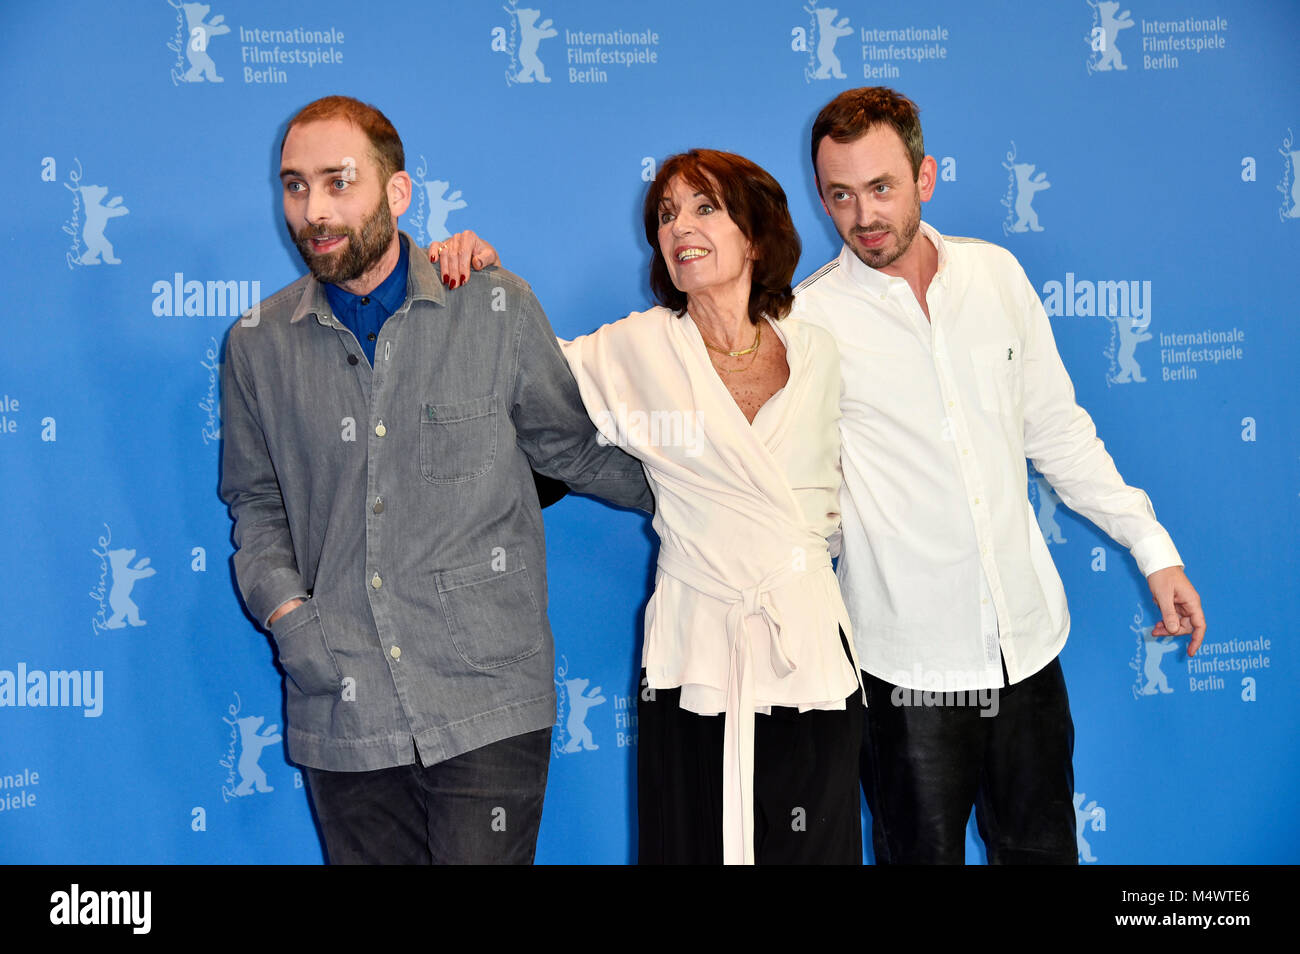 Mans Mansson, Leonore Ekstrand and Axel Petersen during the 'Toppen Av  Ingenting / The Real Estate' Photocall, Berlinale 2018' photocall at the  68th Berlin International Film Festival / Berlinale 2018 on February